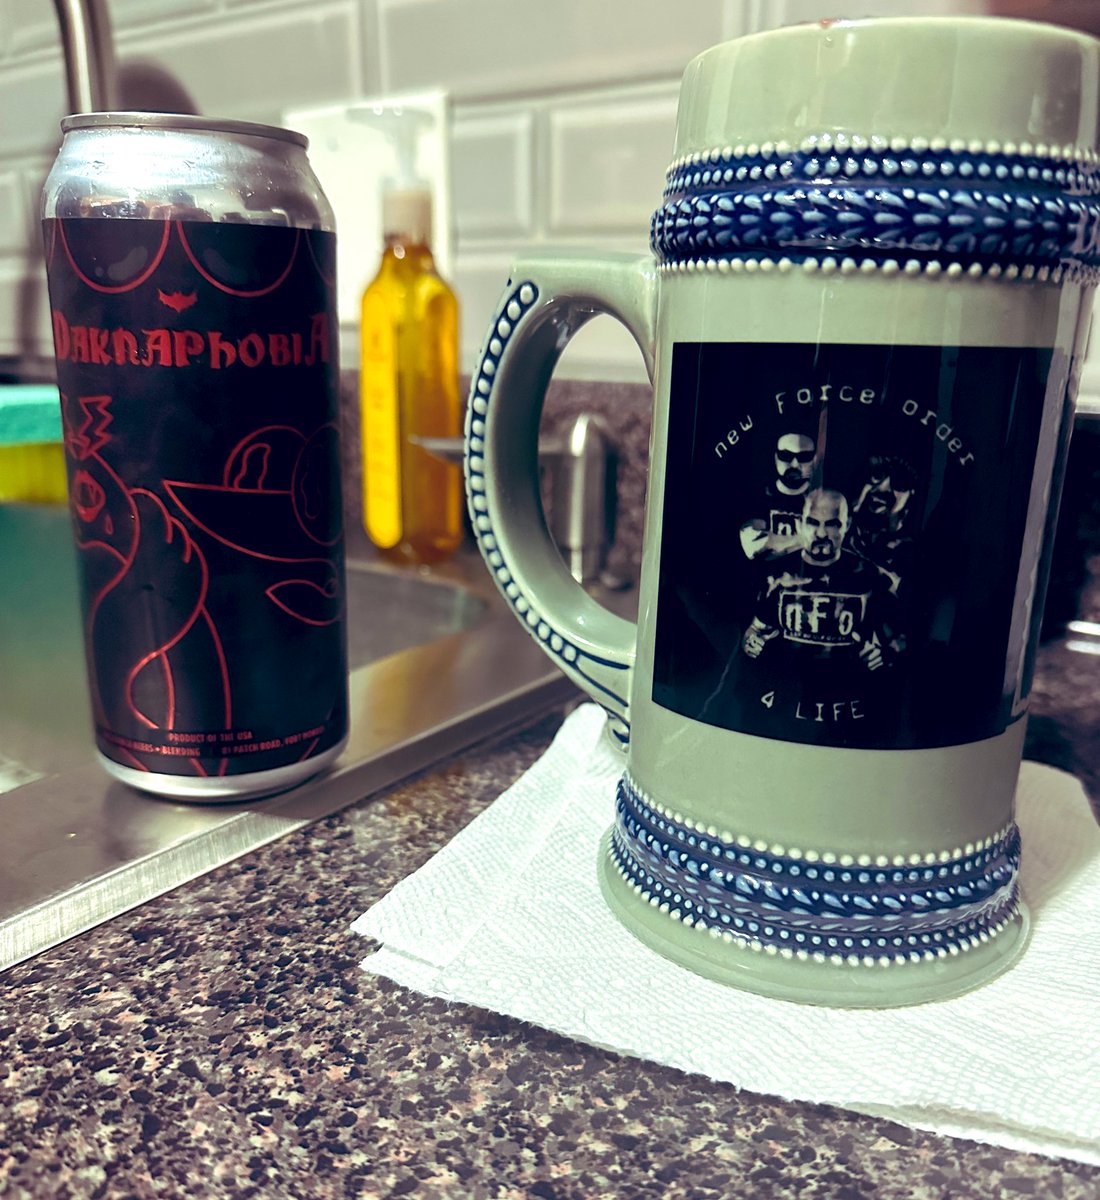 After a long day at work, cracked open my last can of #Daknaphobia by @OozlefinchBeers …
Lone can was still hanging in my fridge from bday weekend festivities. 
Cheers. 🍺
#drinklocal #craftbeersnob #pewpewpew #nFo4life